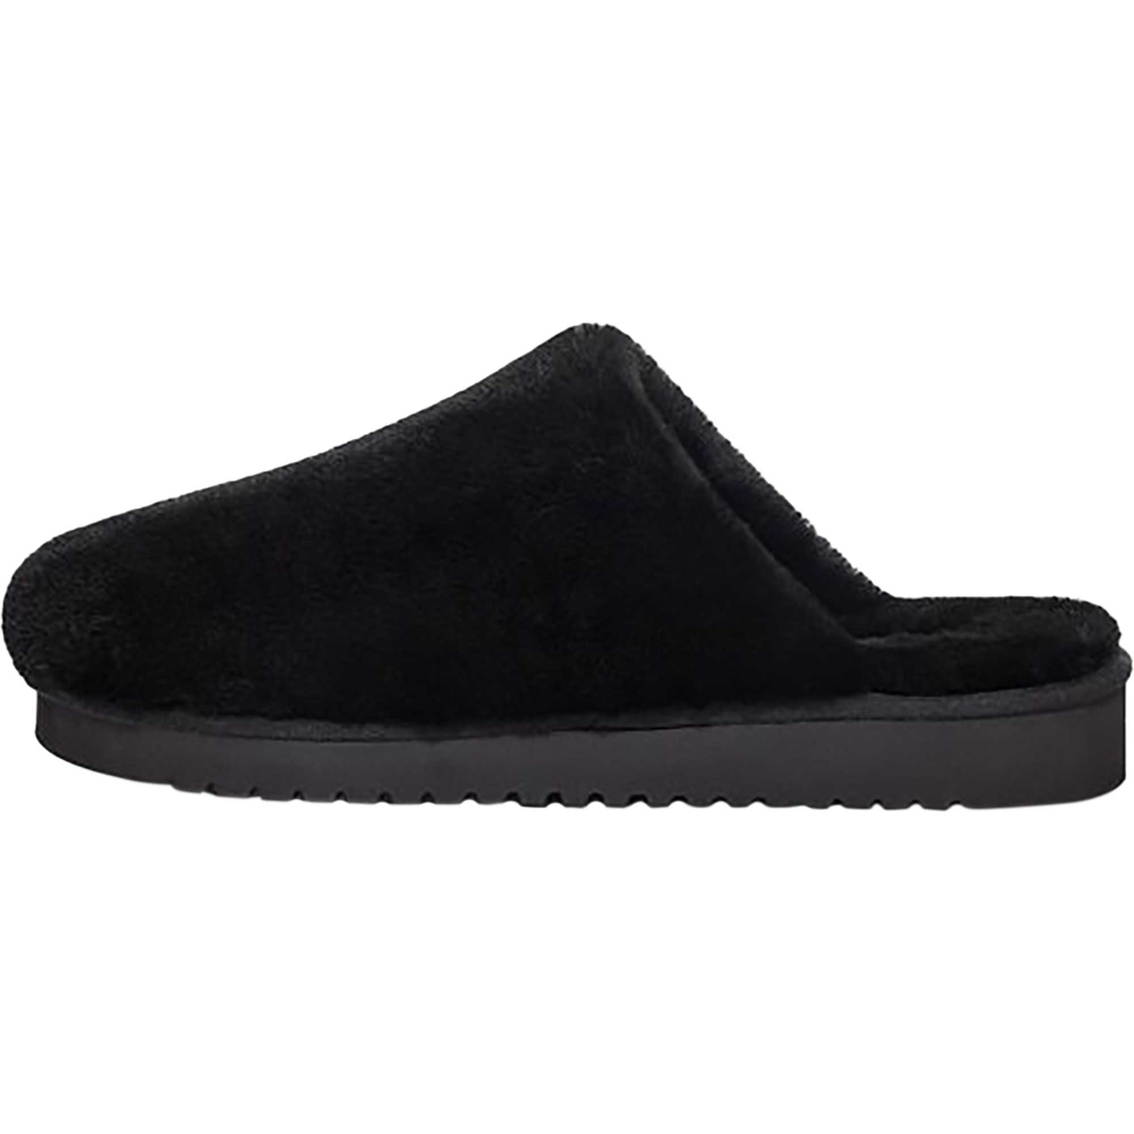 Koolaburra By Ugg Women's Pomi Slippers | Slippers | Shoes | Shop The ...